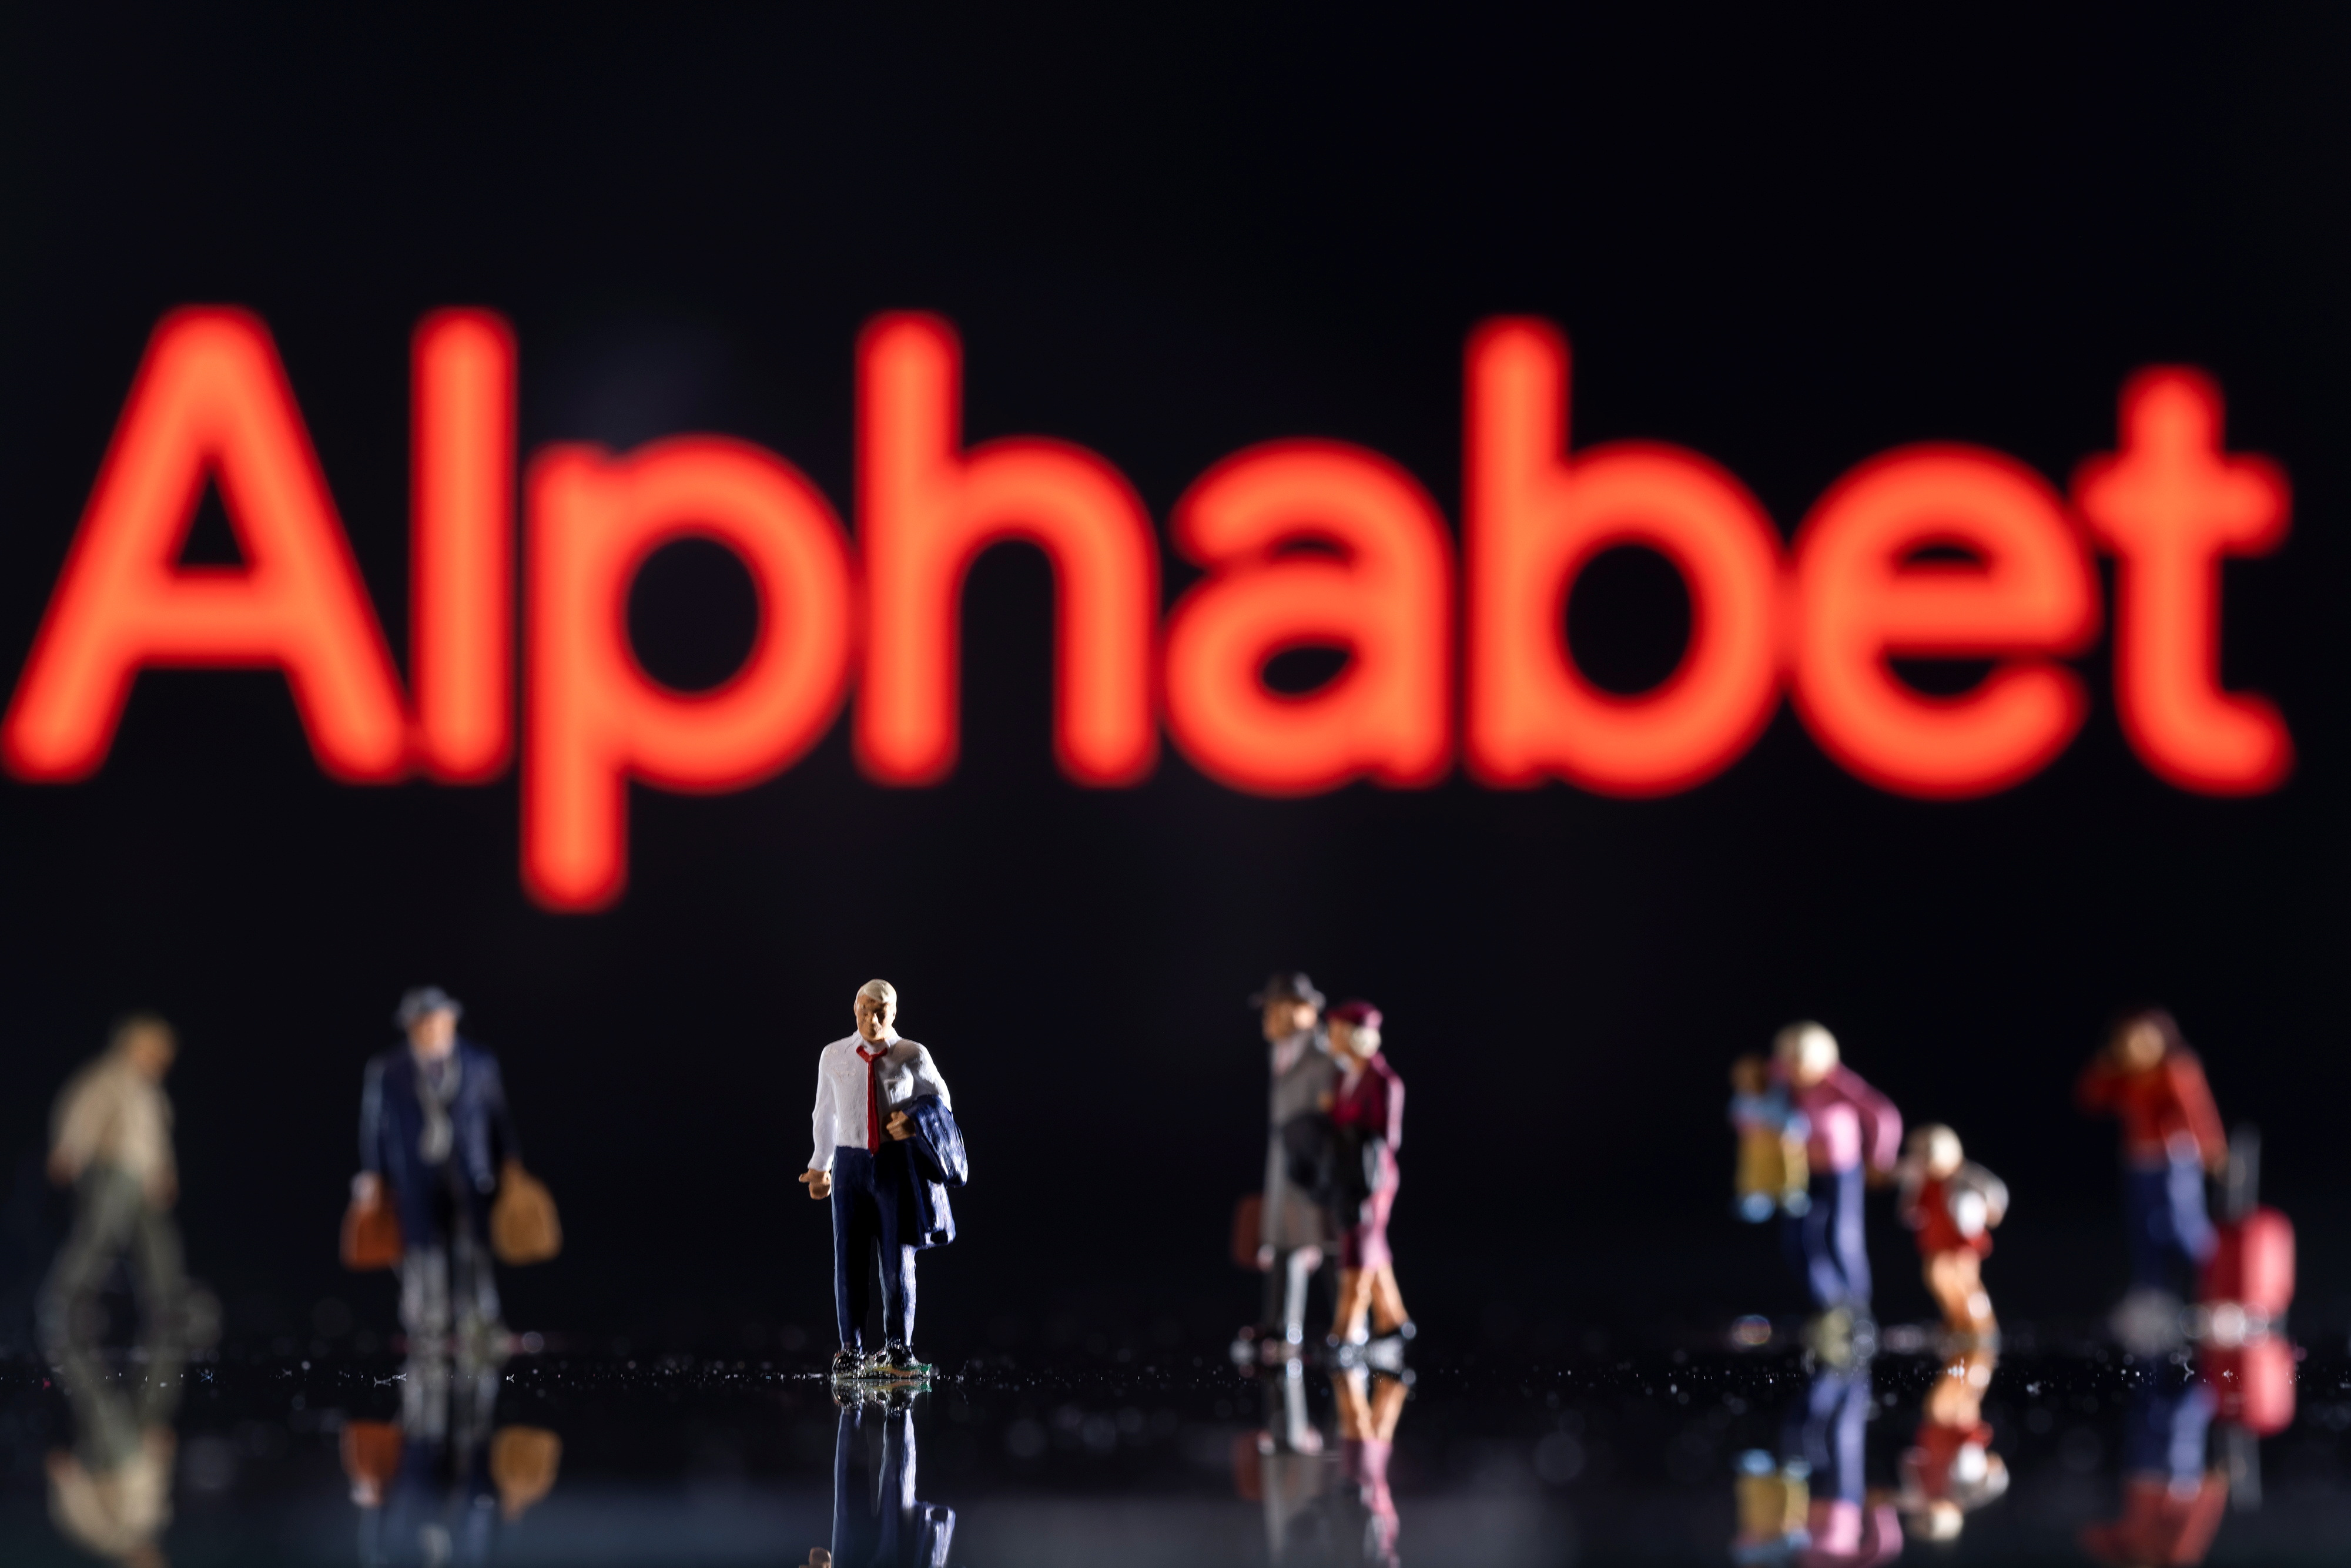 Illustration shows small figurines and displayed Alphabet logo